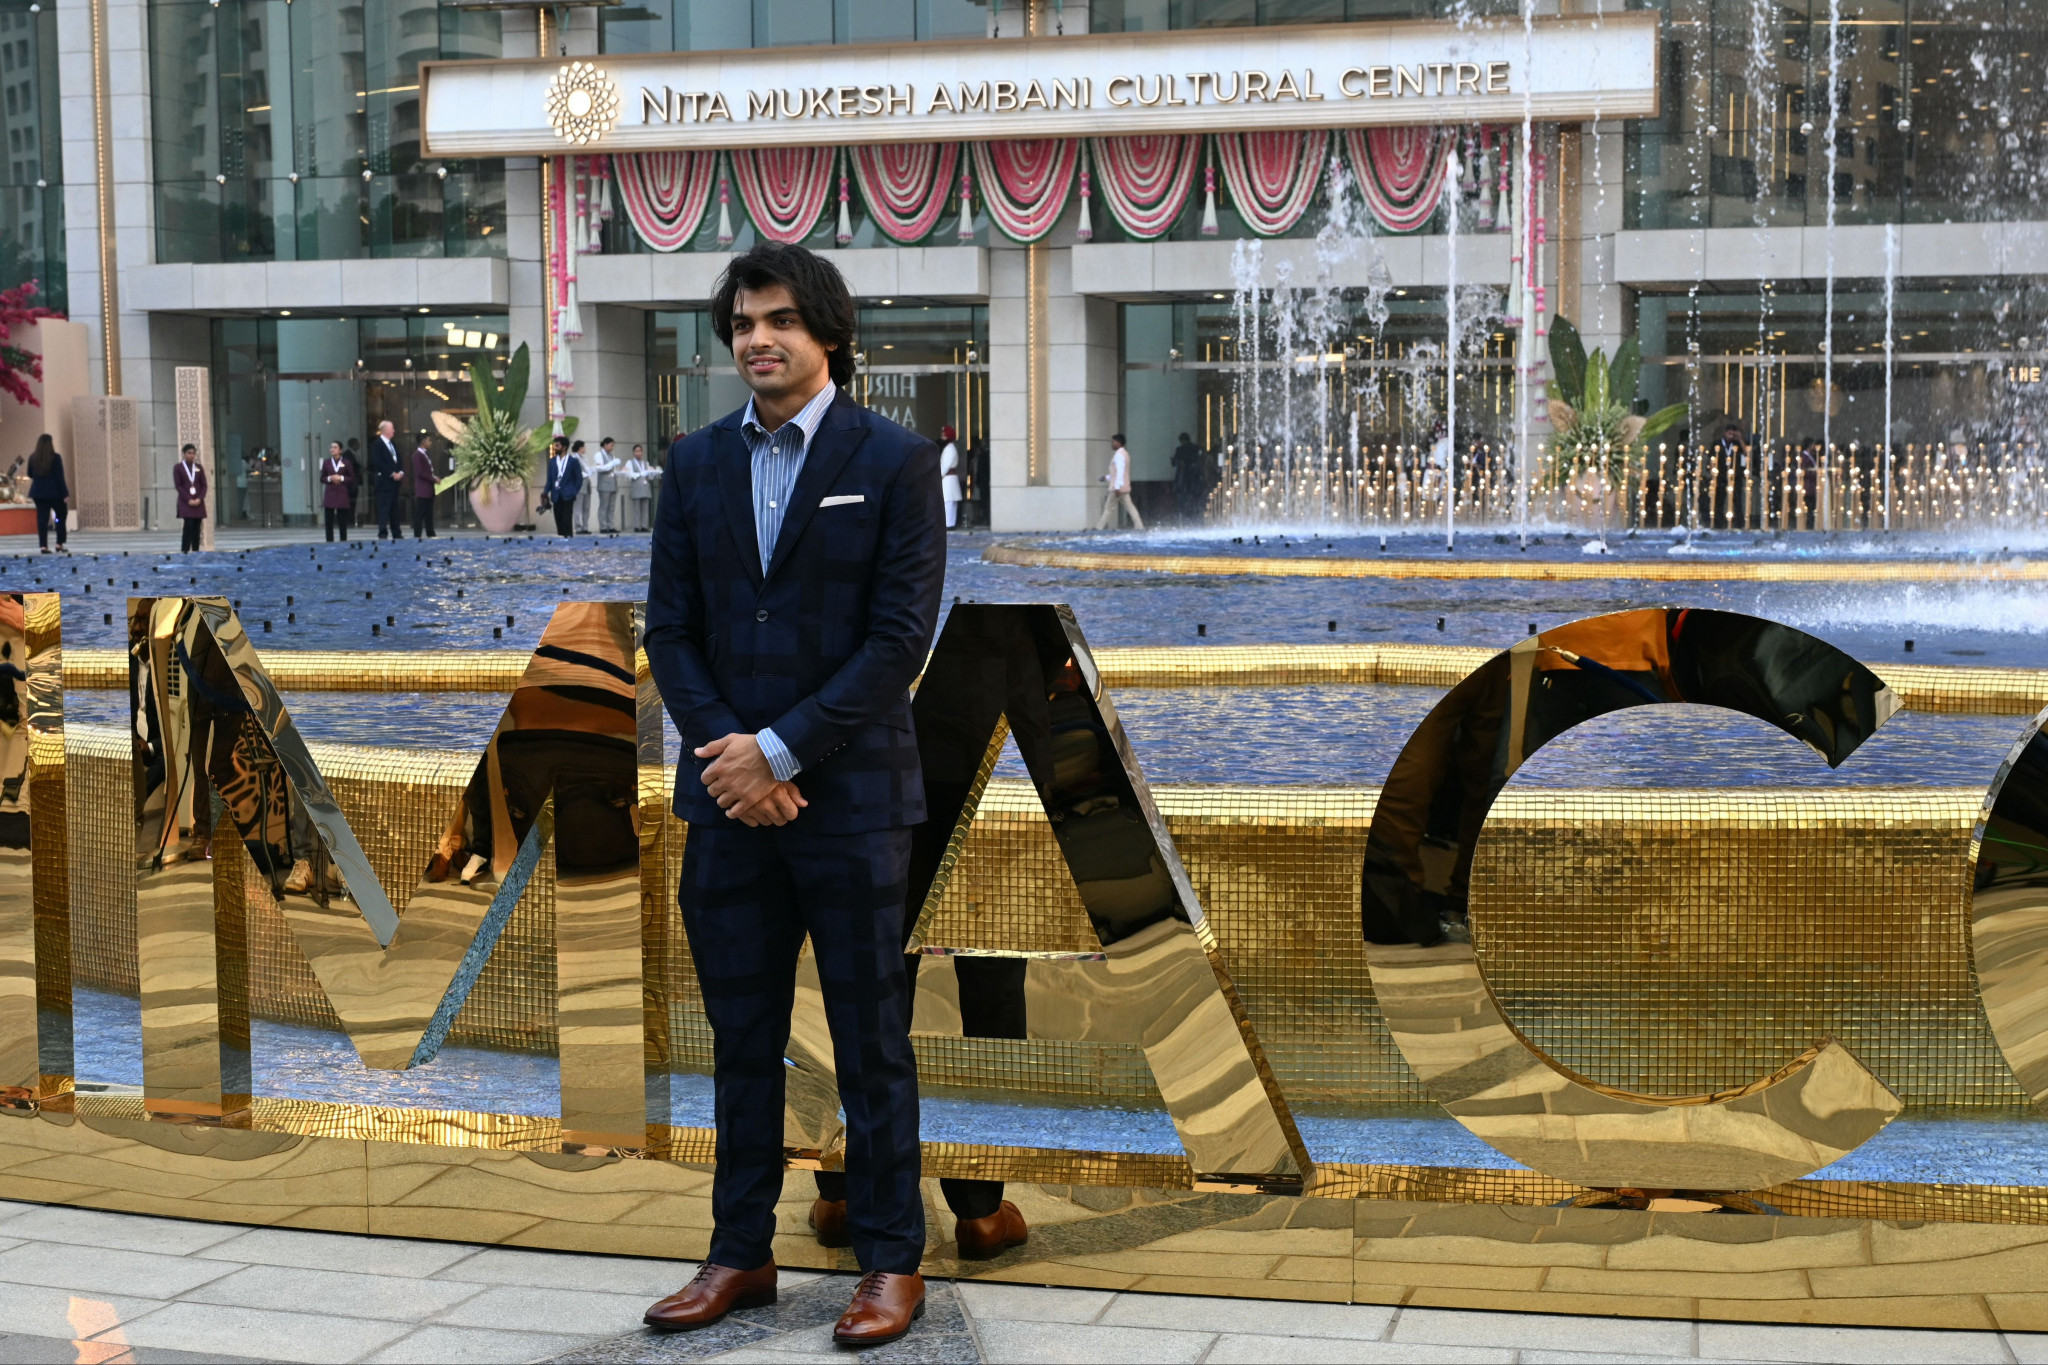 Reigning Olympic javelin champion Neeraj Chopra of India was invited to the Opening Ceremony ©Getty Images